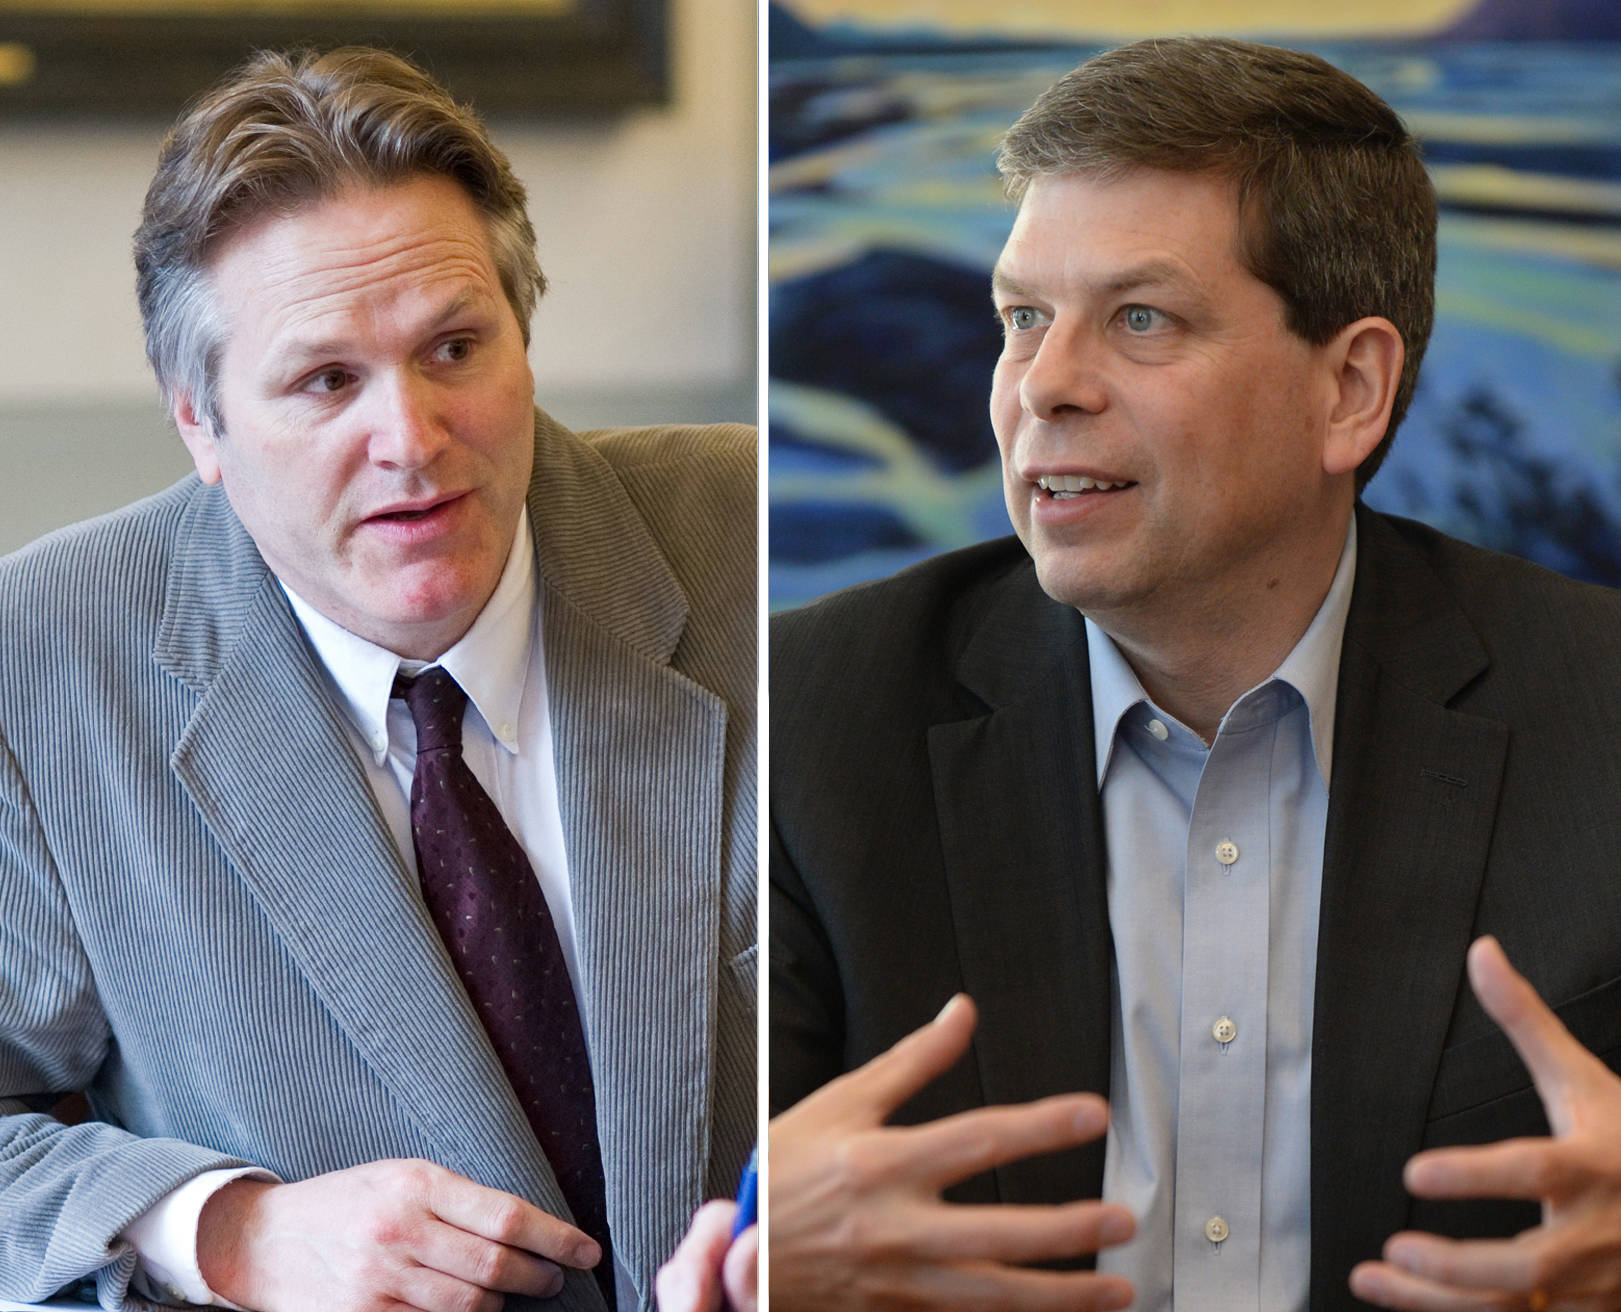 Republican Mike Dunleavy, left, and Democrat Mark Begich, right, are the two leading candidates in the race to replace incumbent independent Gov. Bill Walker. (Composite image)